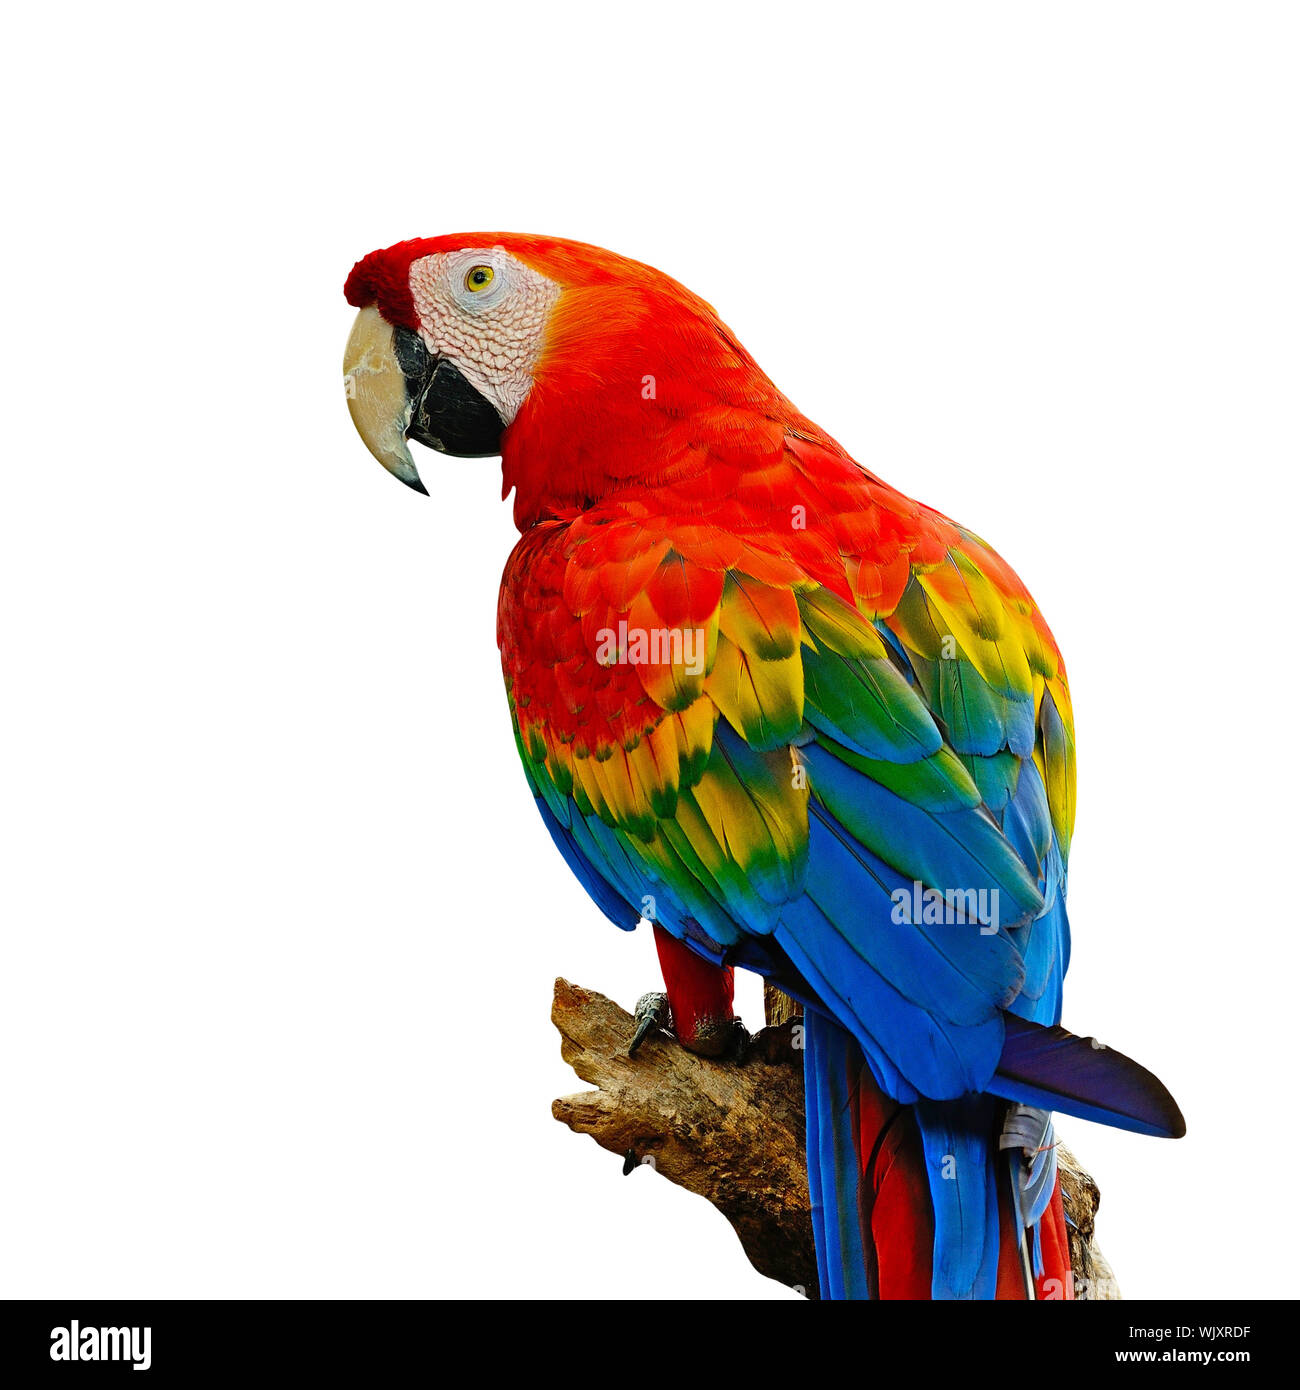 https://c8.alamy.com/comp/WJXRDF/colorful-scarlet-macaw-aviary-sitting-on-the-log-isolated-on-a-white-background-WJXRDF.jpg